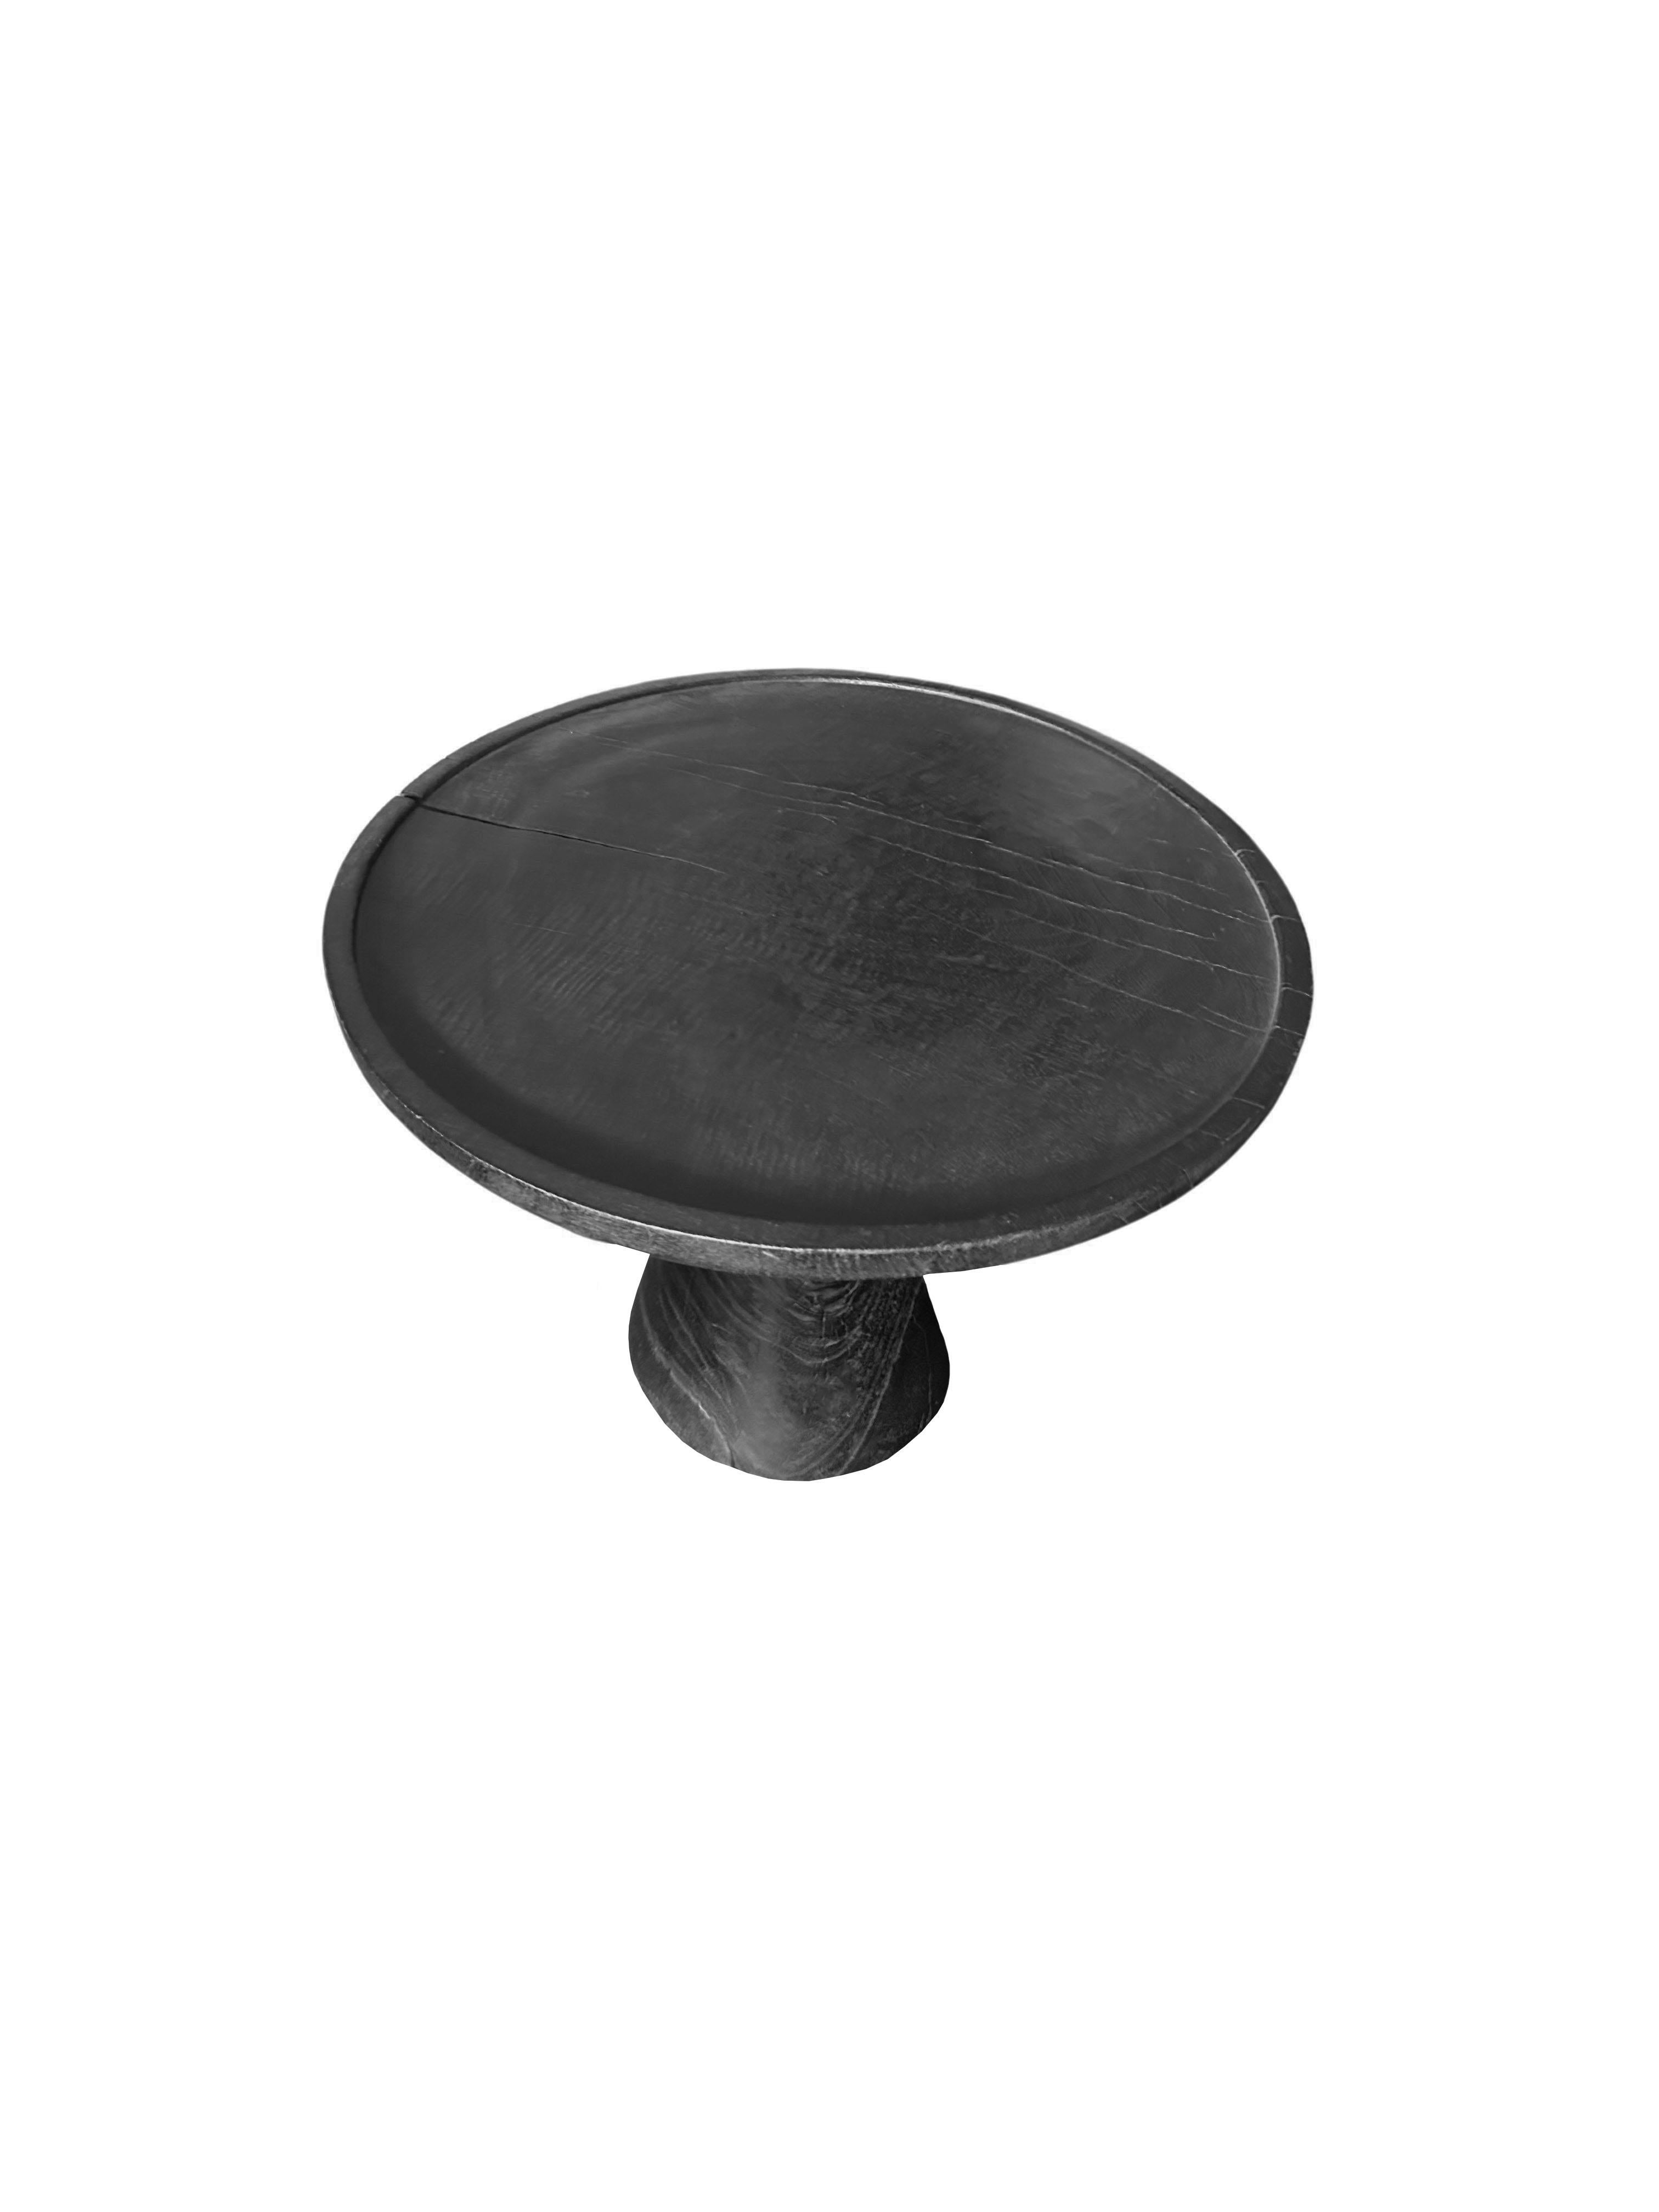 A wonderfully organic round side table. Its rich black pigment was achieved through burning the wood three times. Its neutral pigment and subtle wood texture makes it perfect for any space. A uniquely sculptural and versatile piece. This table was